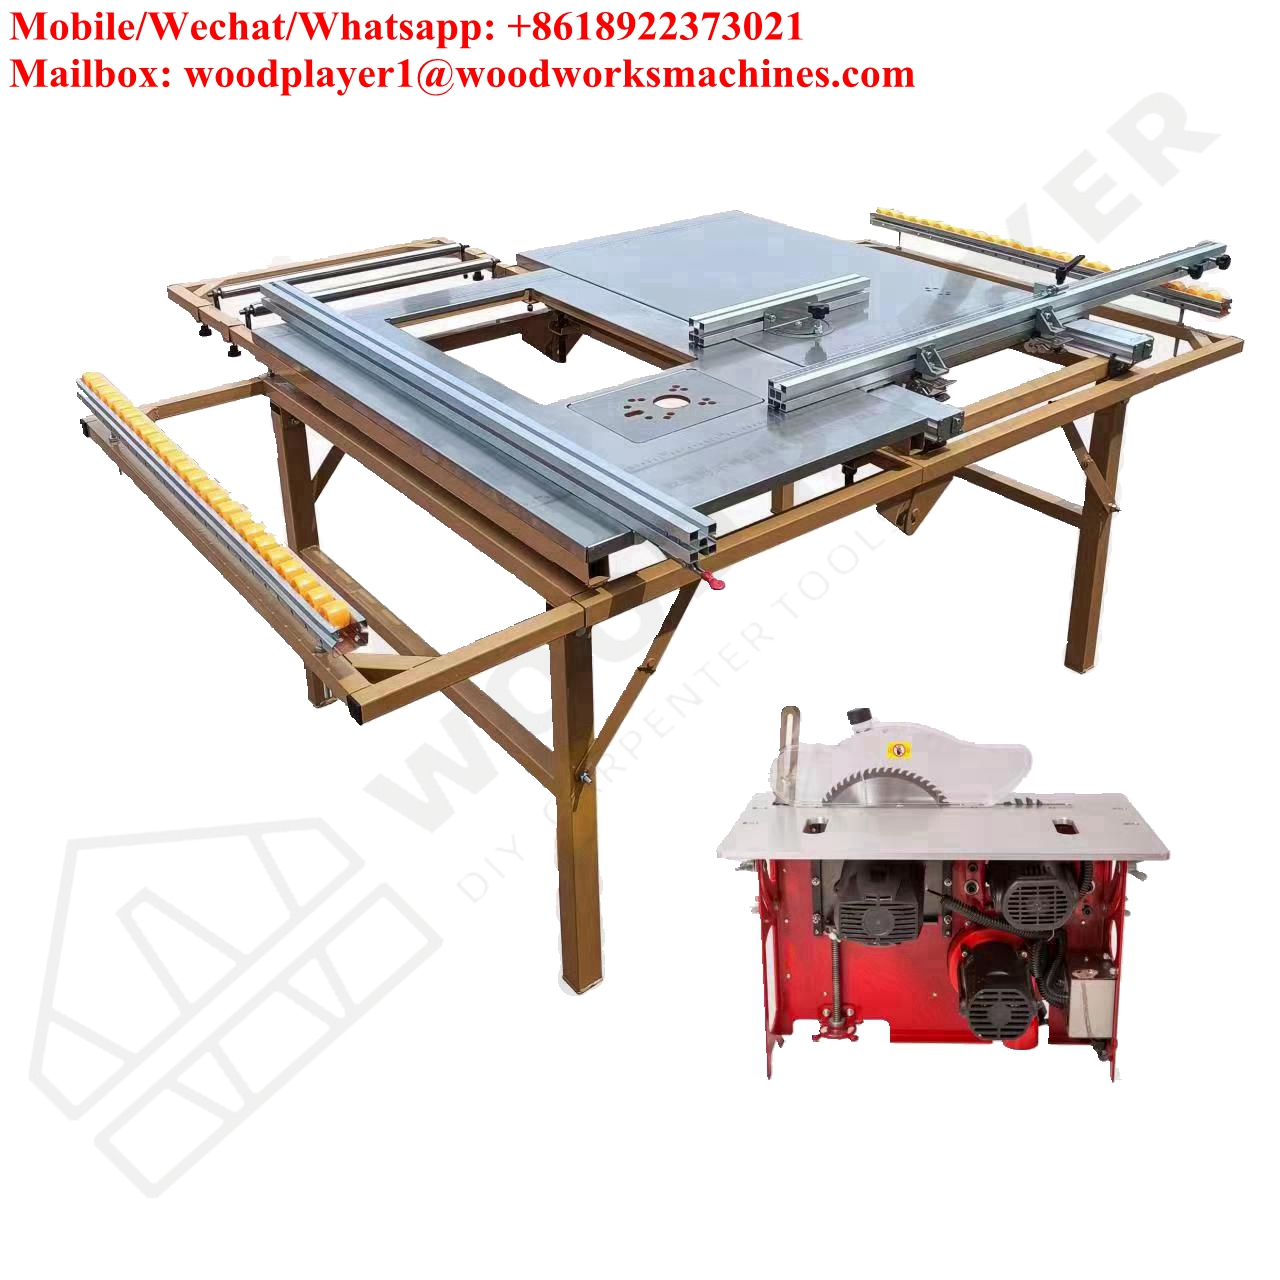 New F800 Saw Table With Manual Saw And Saw Table Mini Edge Banding Machine